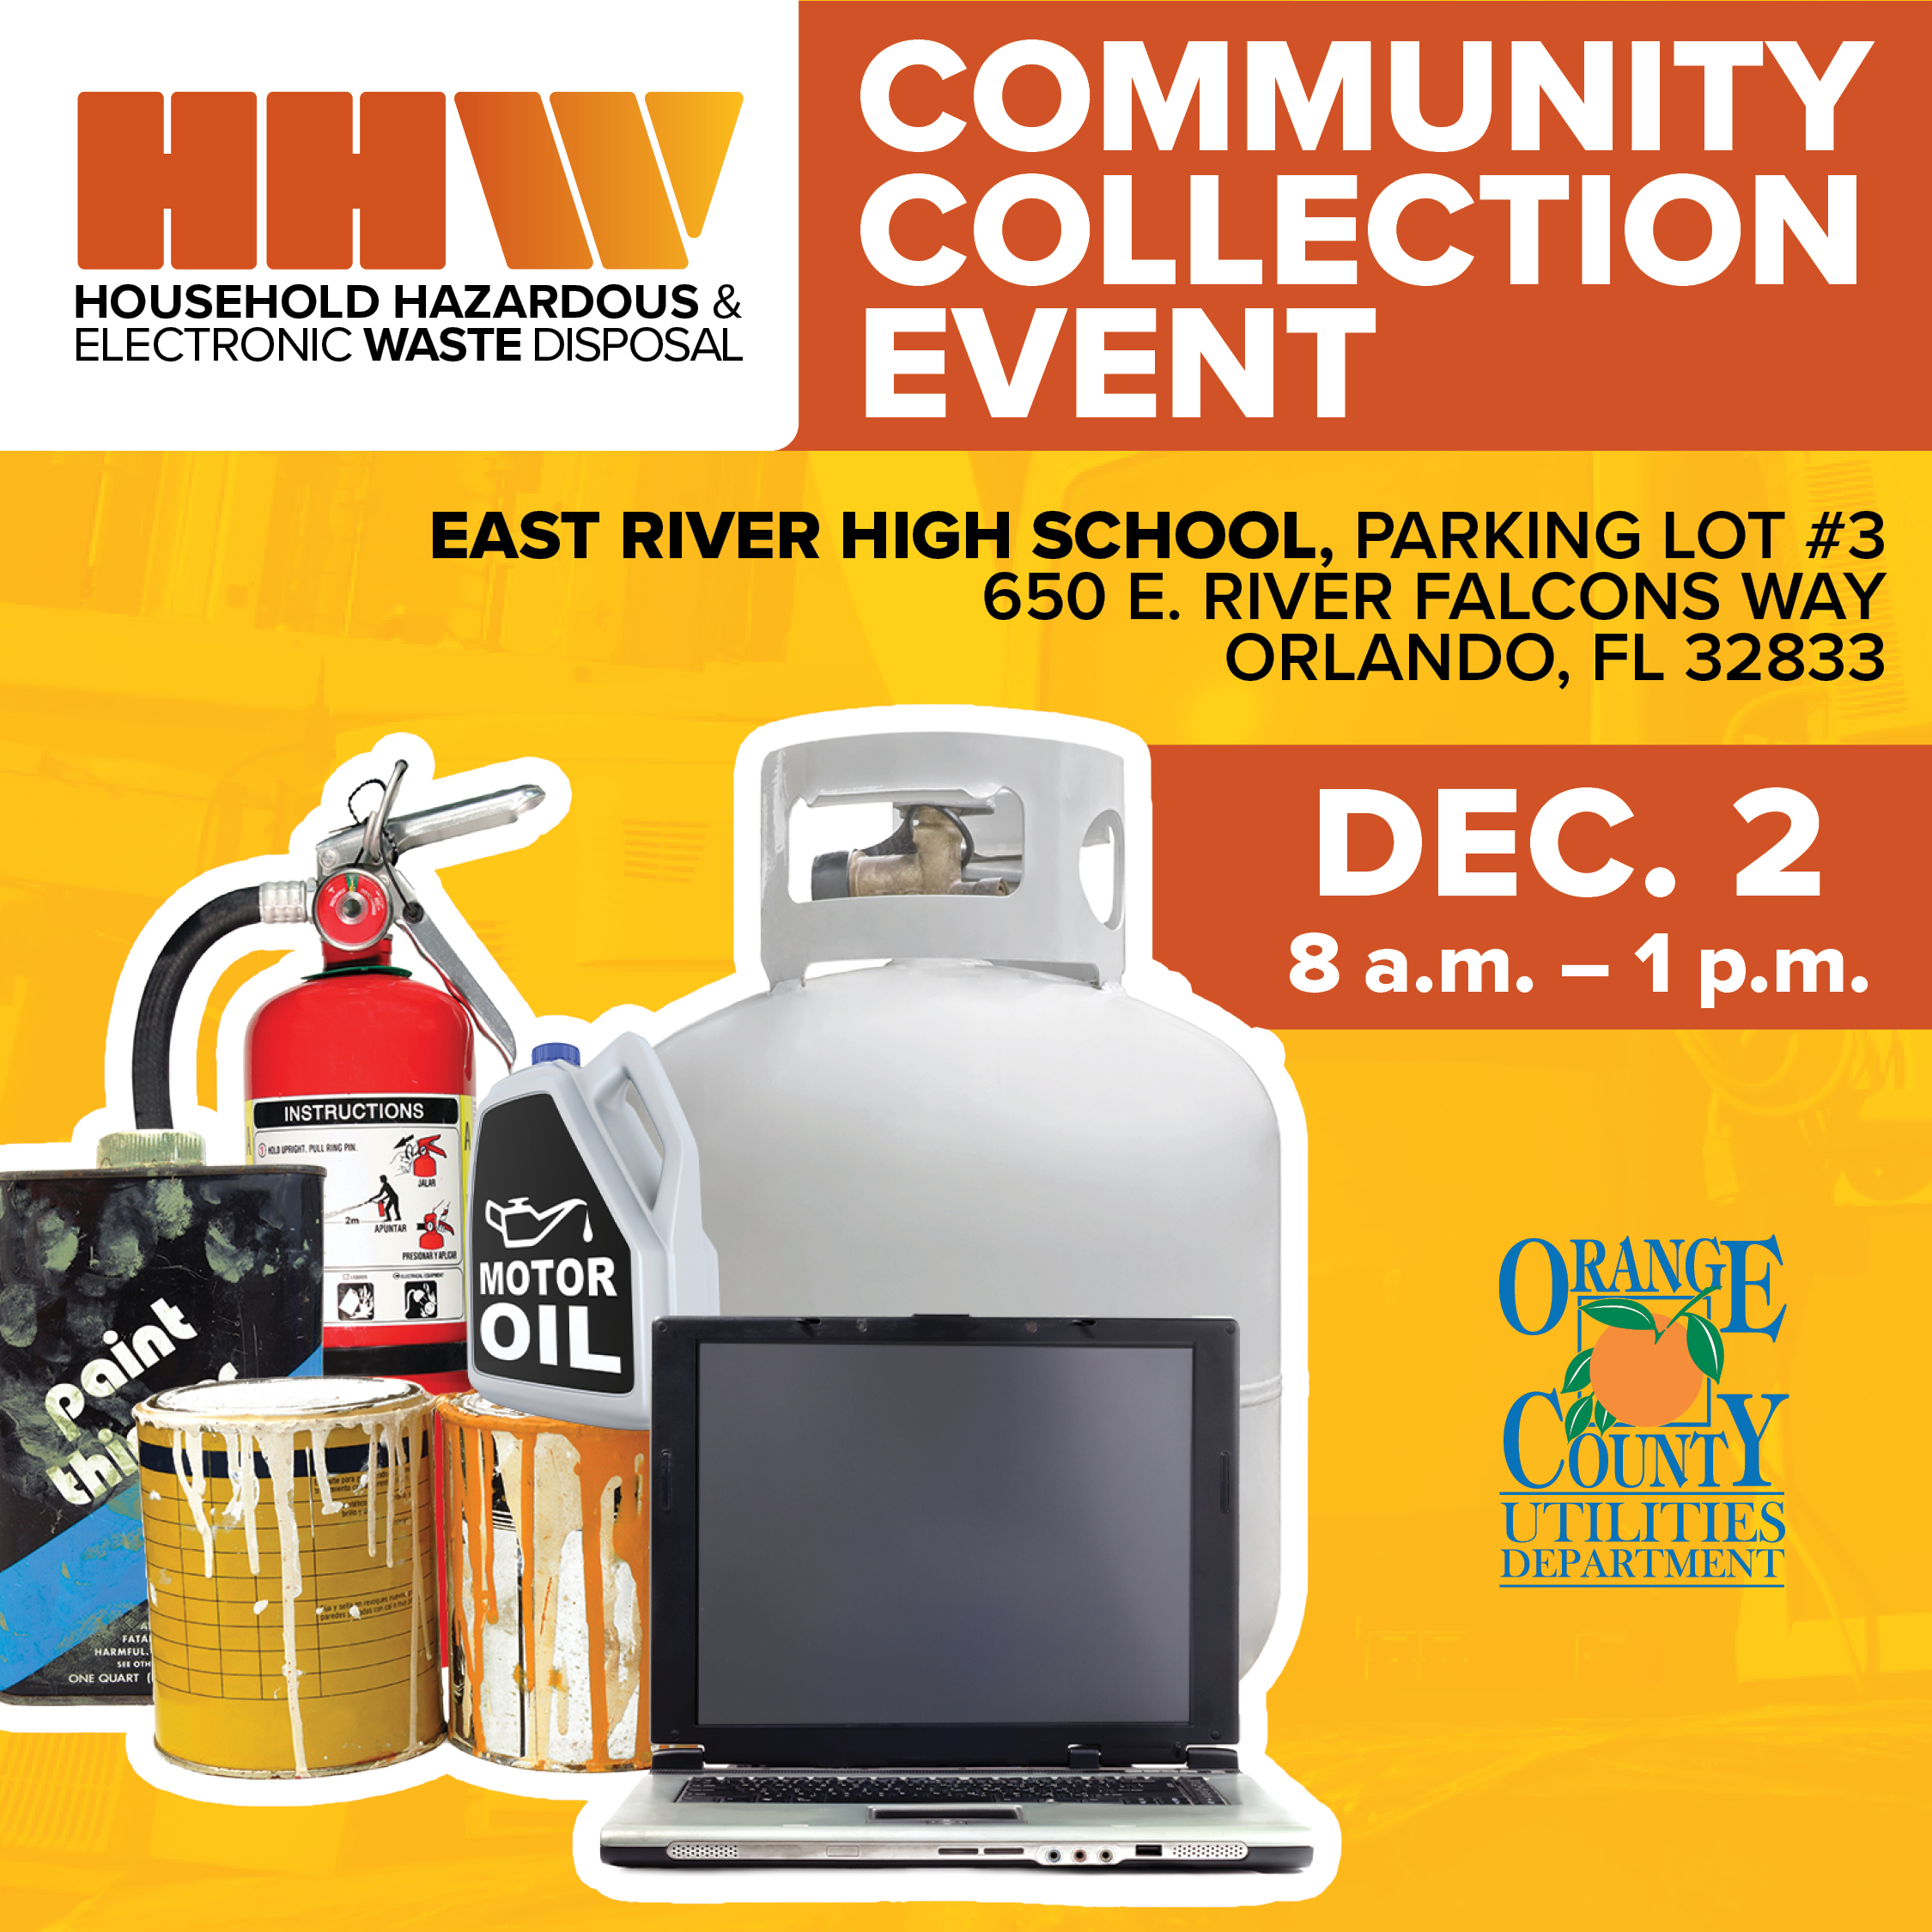 Orange County Utilities invites Orange County residents to a Household Hazardous Waste and Electronic Waste Community Collection Event on Saturday, December 2, from 8 a.m. to 1 p.m. at East River High School located at 650 E. River Falcons Way.